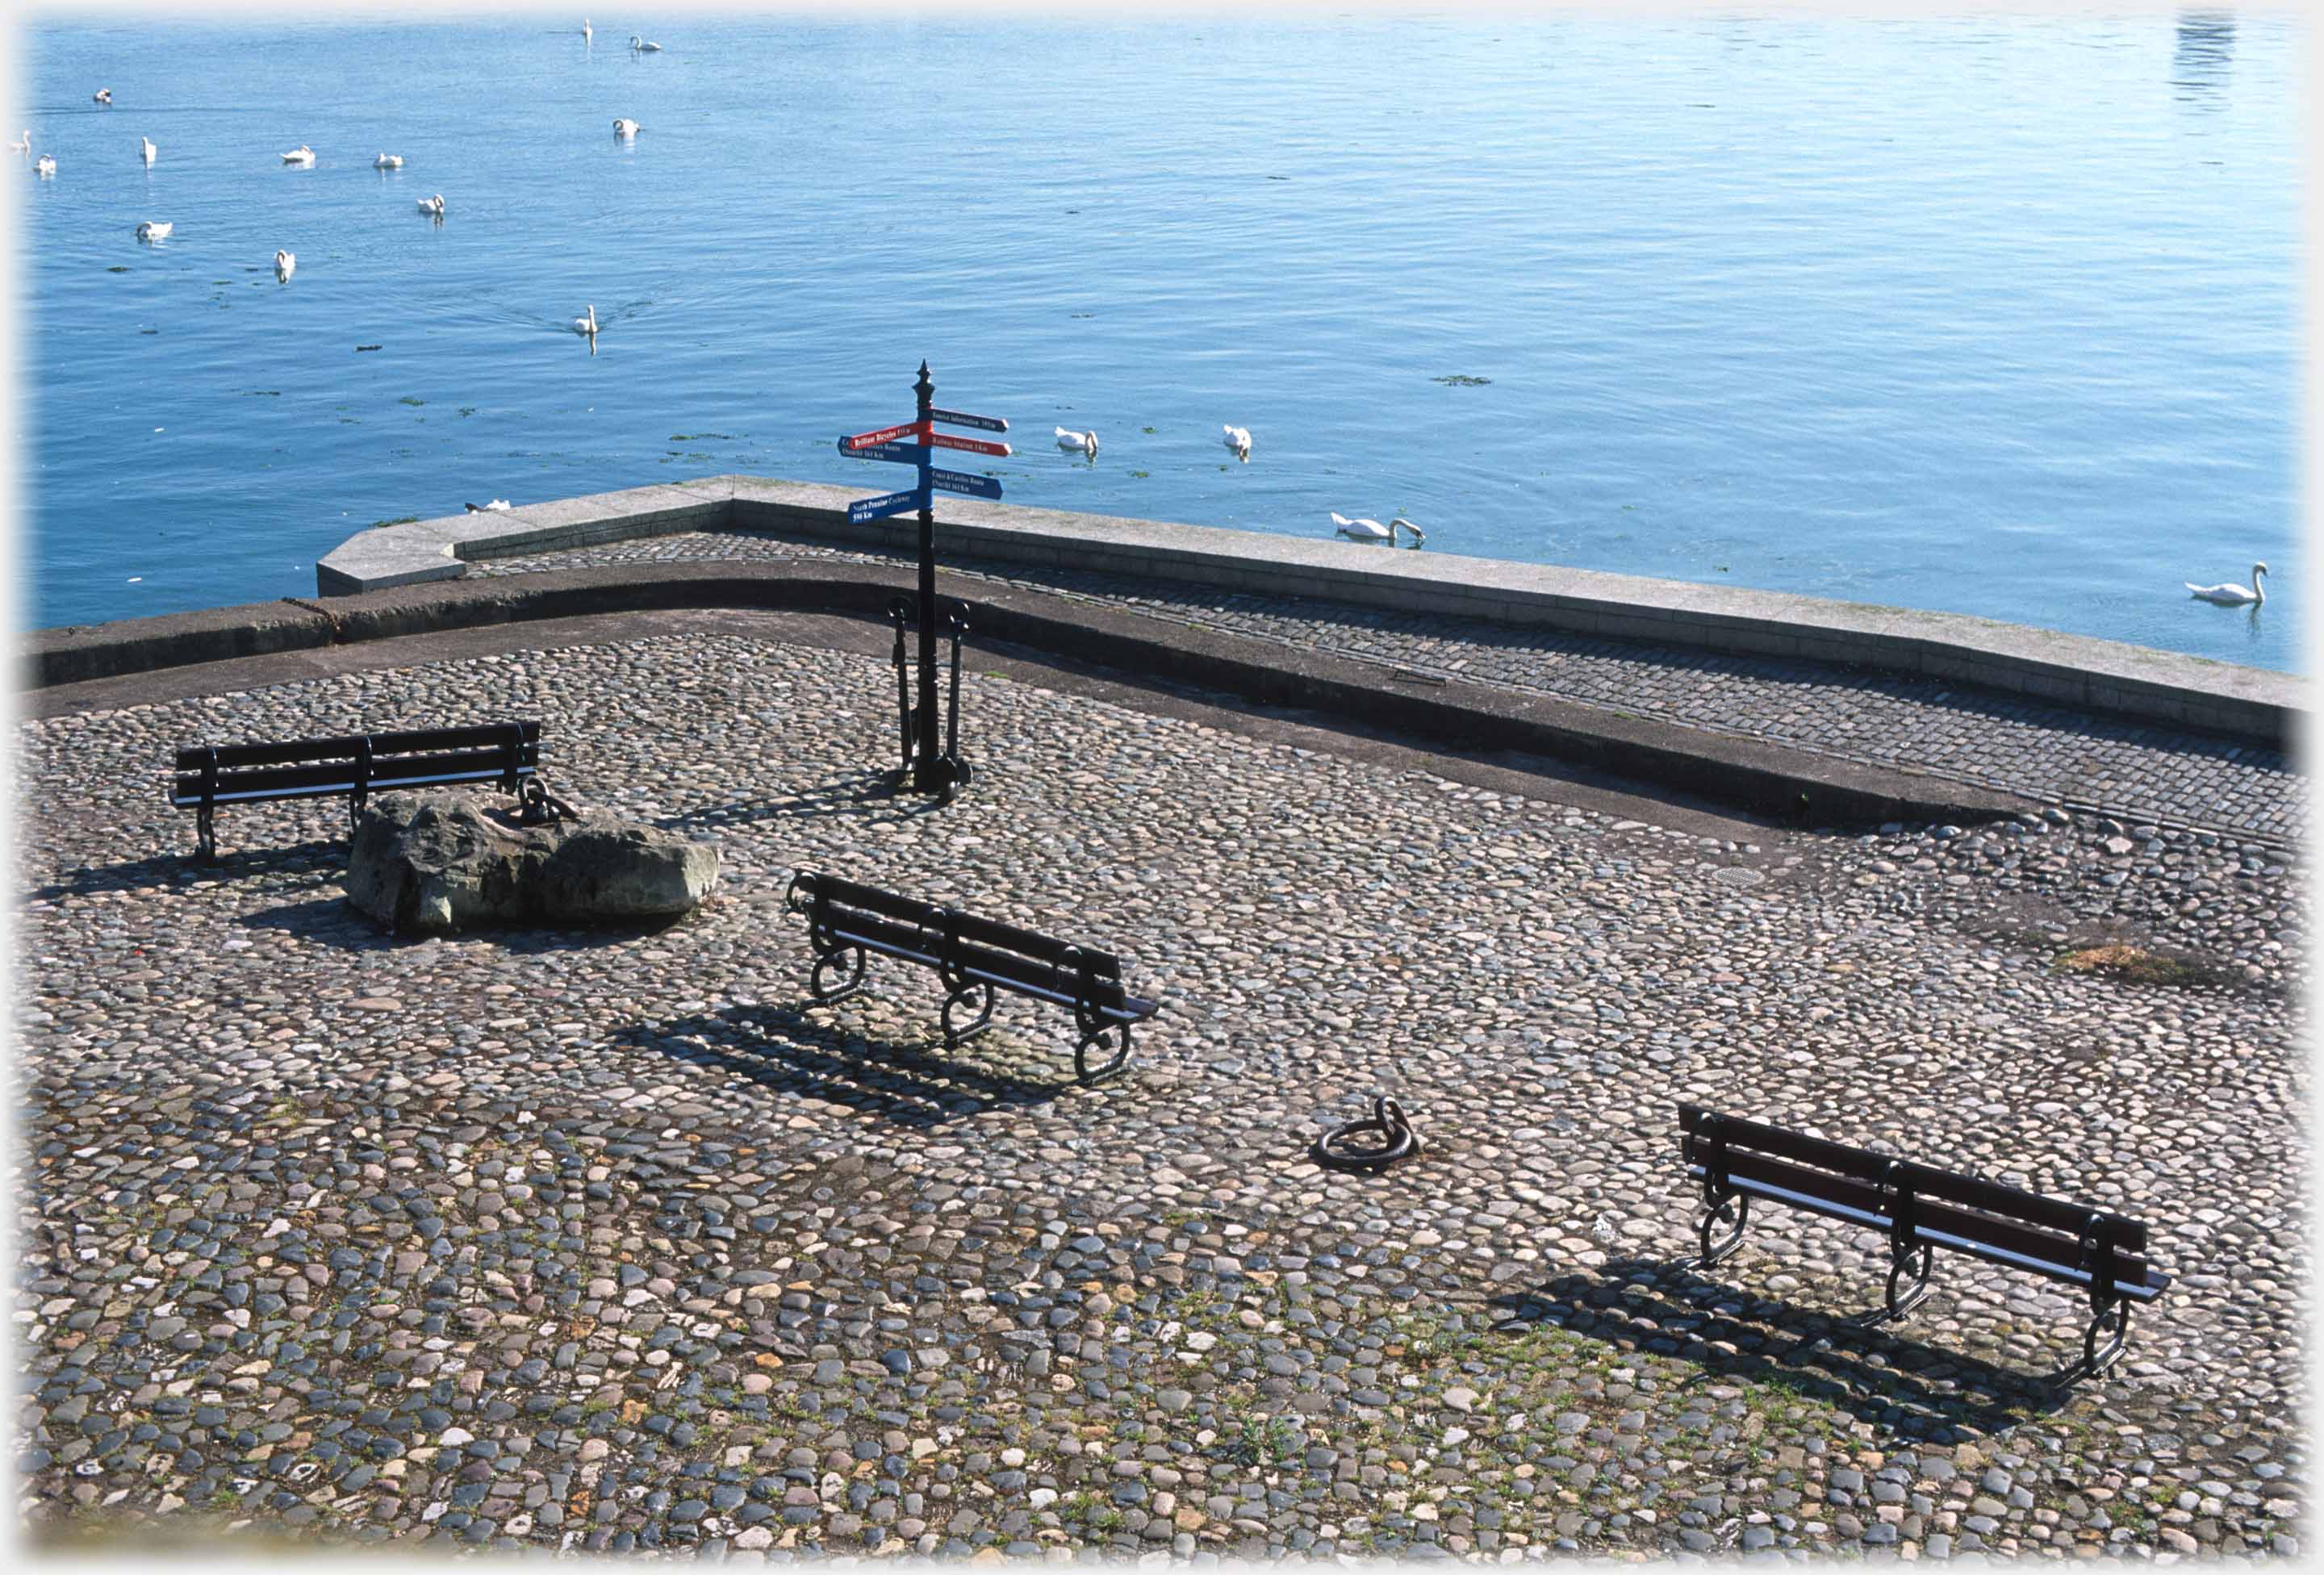 Cobbled promanade with benches and sea around.